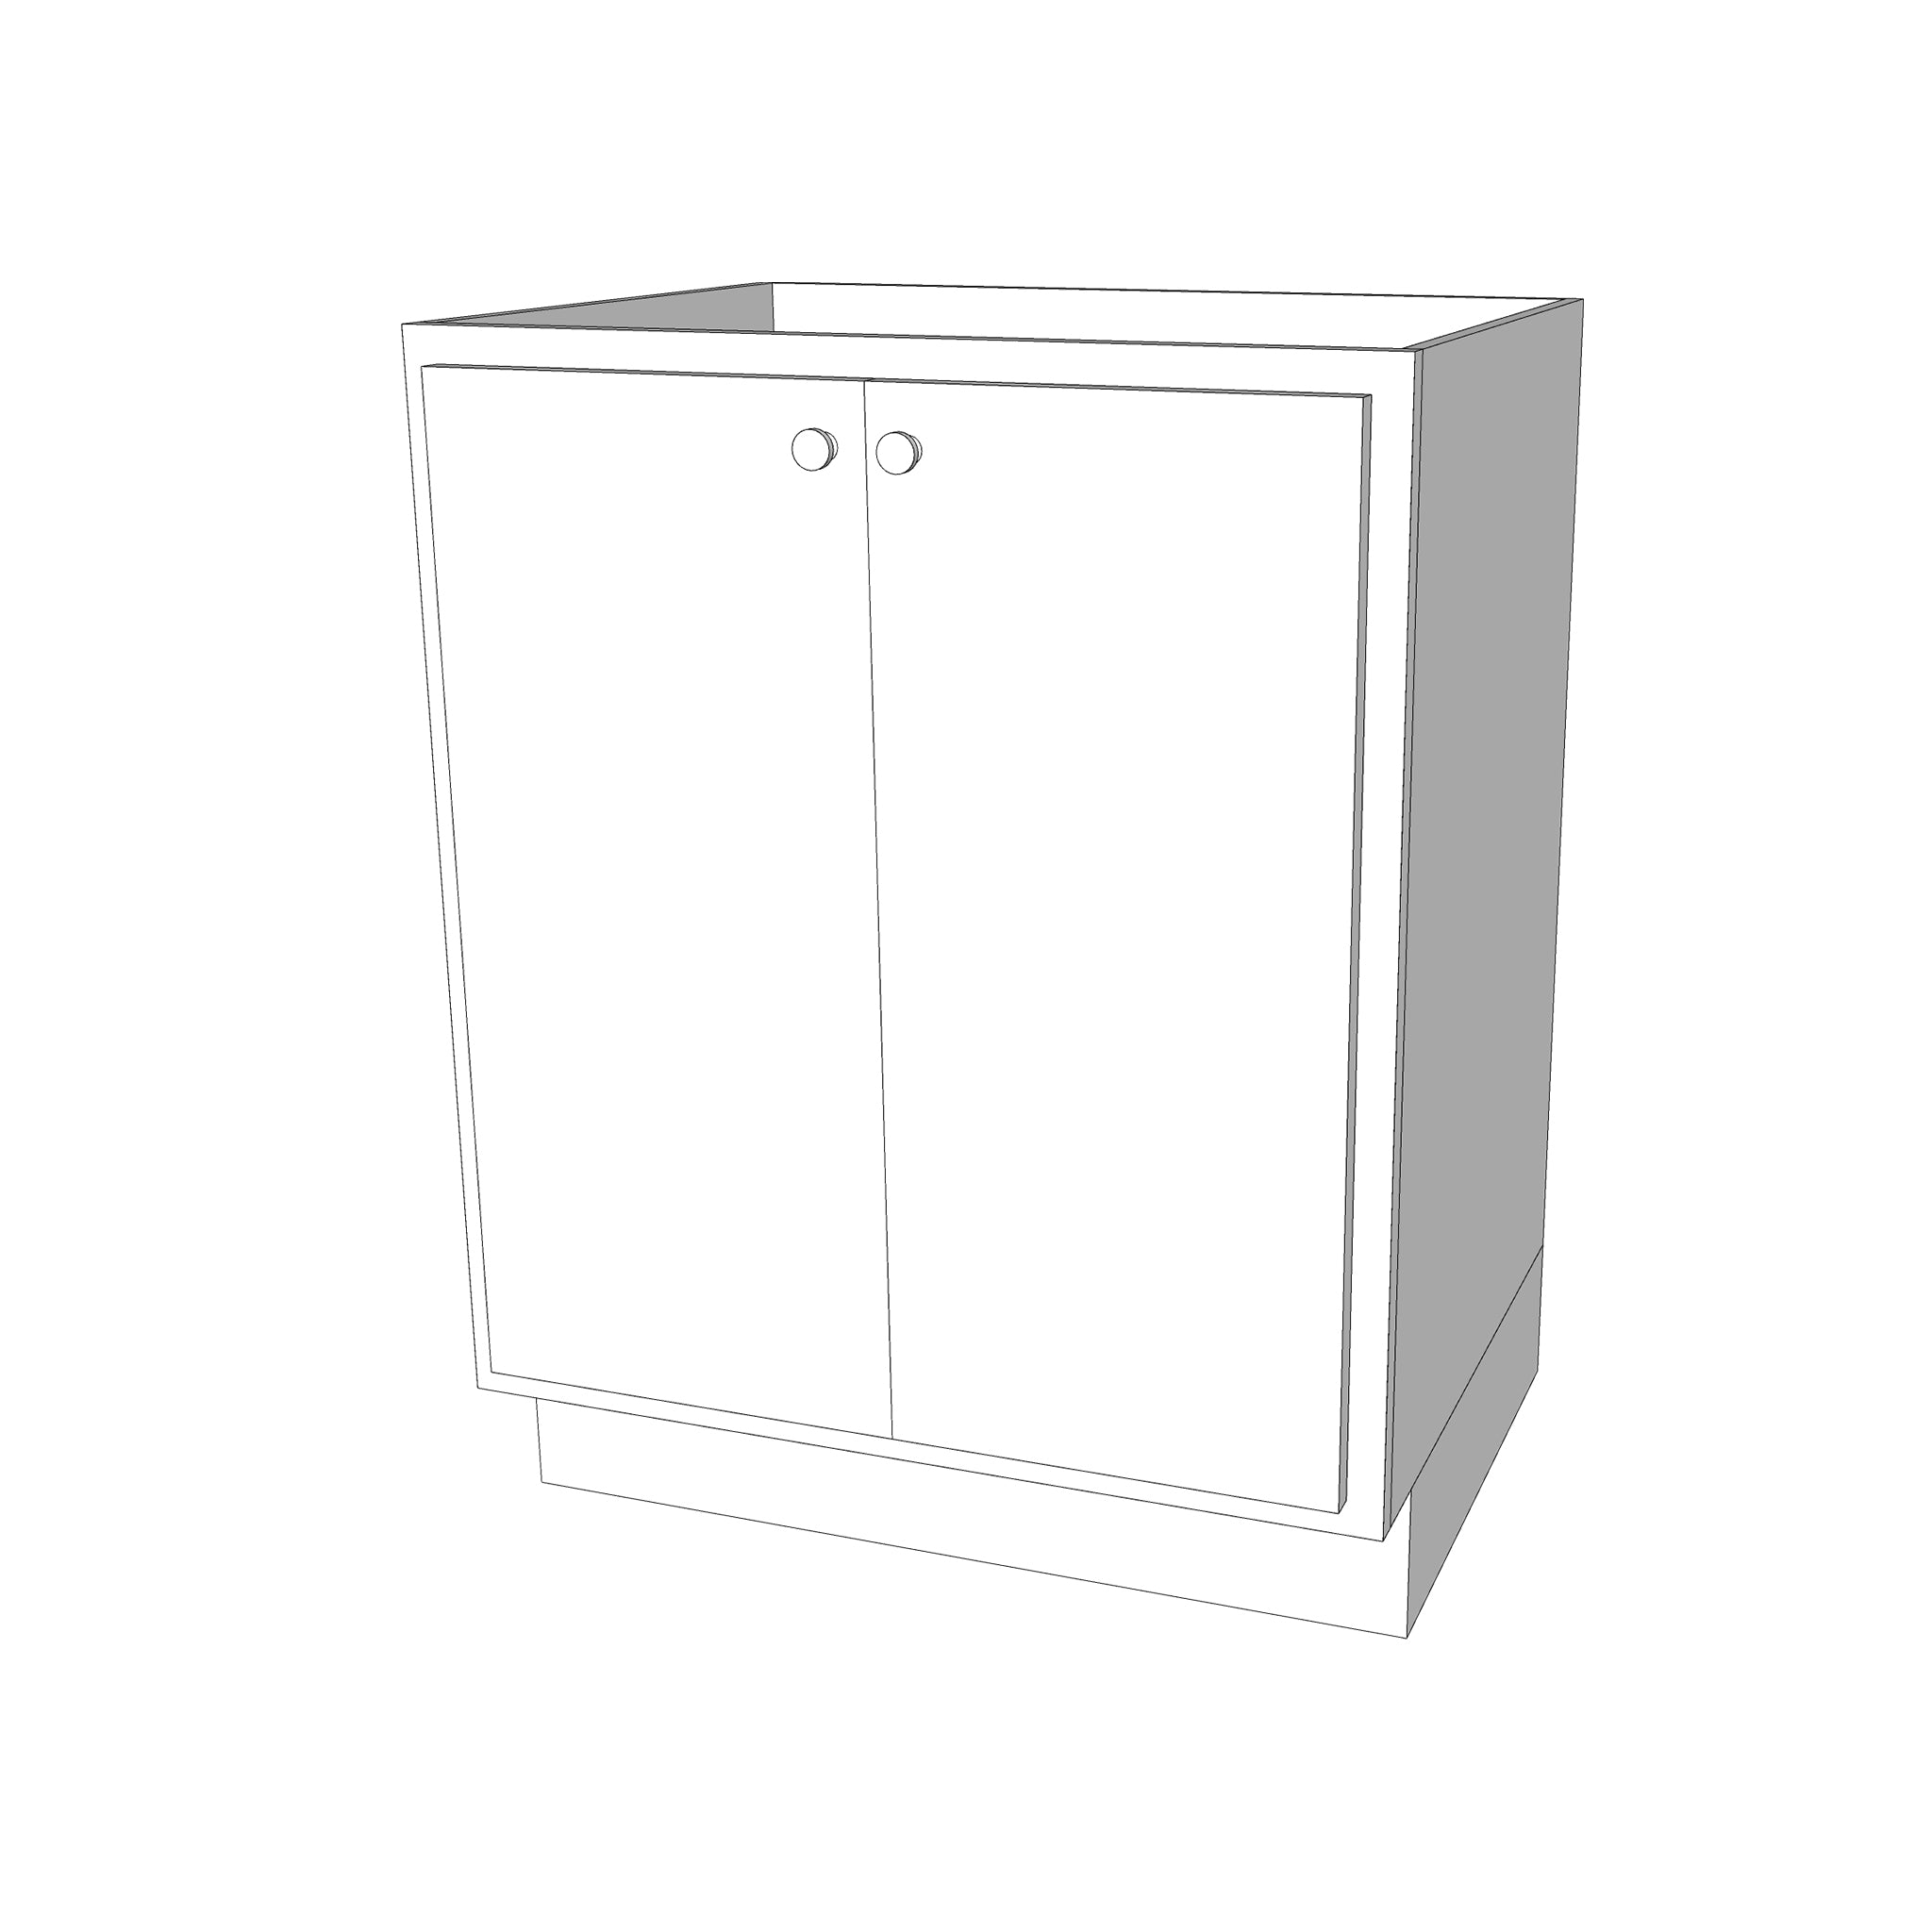 24x30 Full Height Vanity Base Cabinet - Assembled